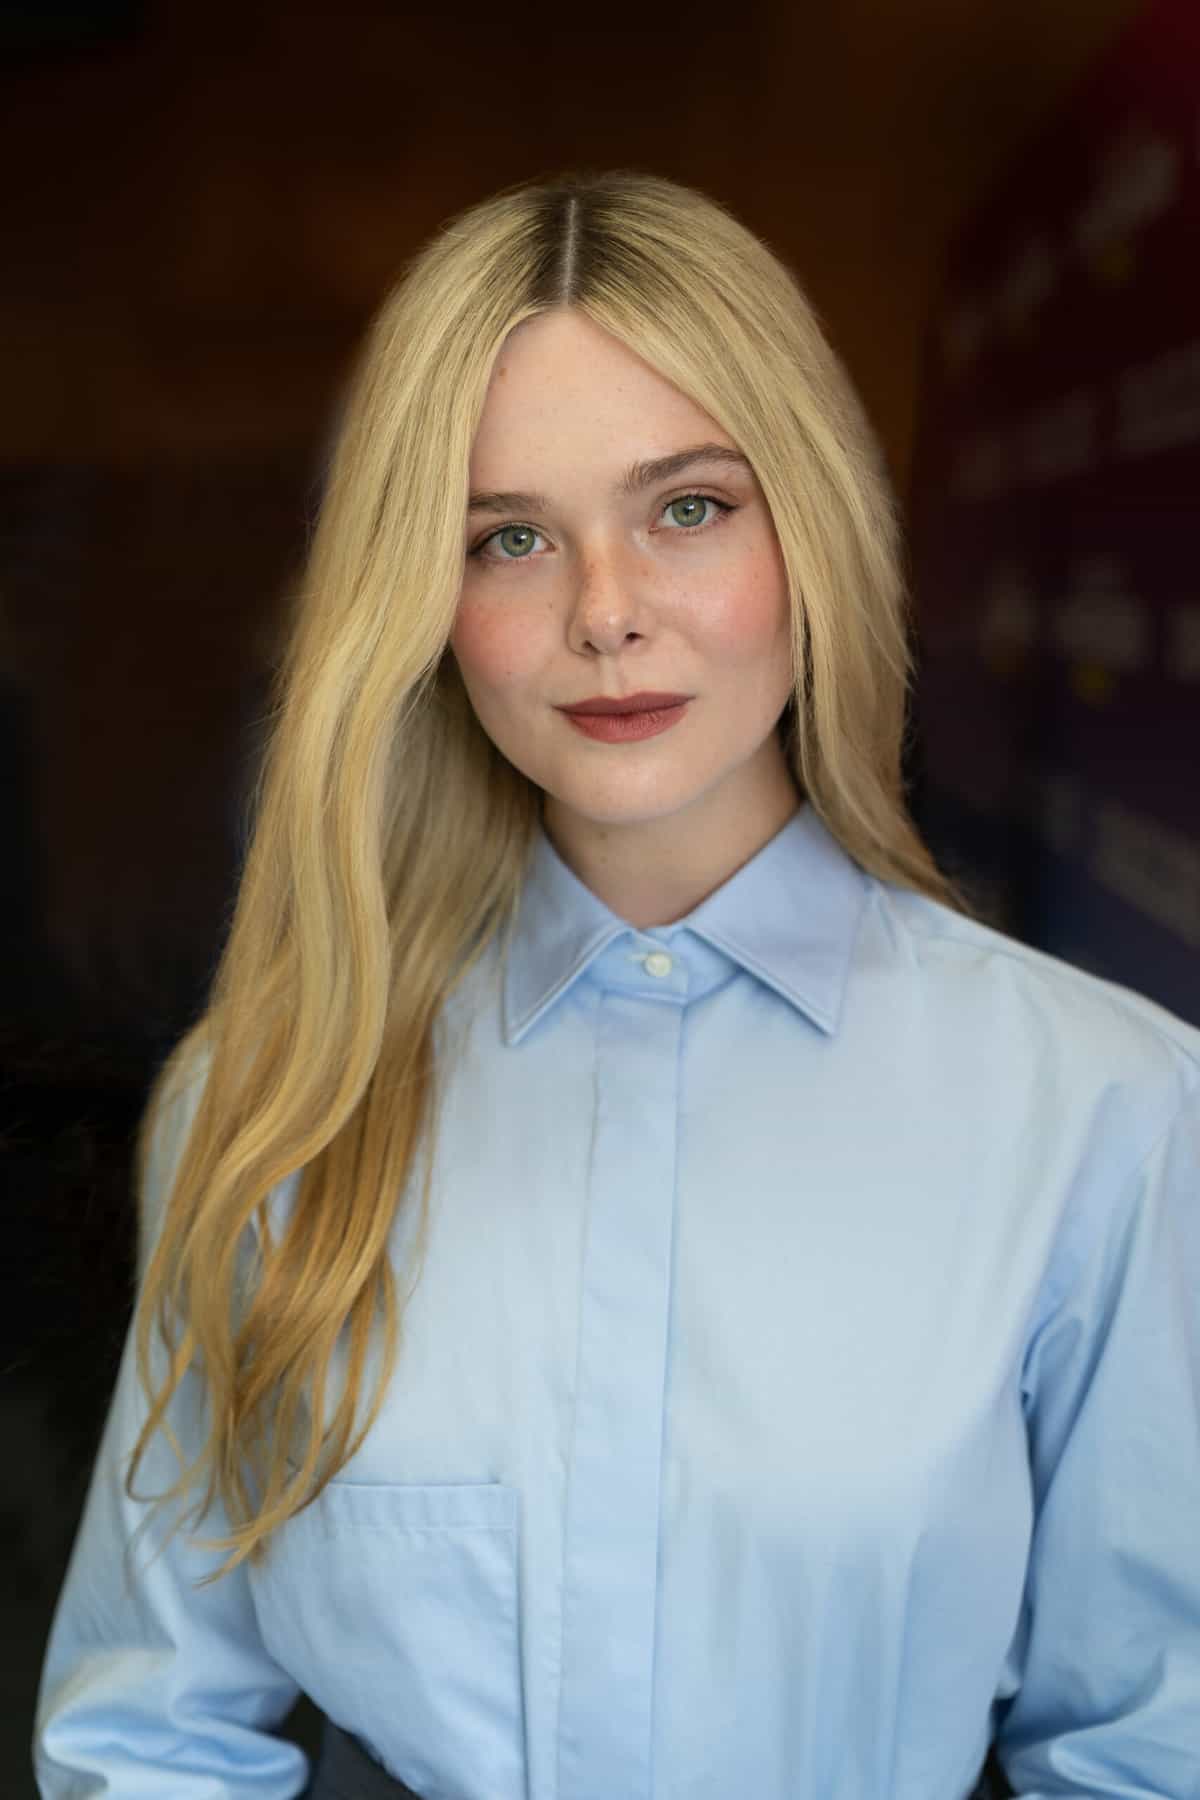 Actress Elle Fanning photographed for Deadline Hollywood by Zusha Goldin